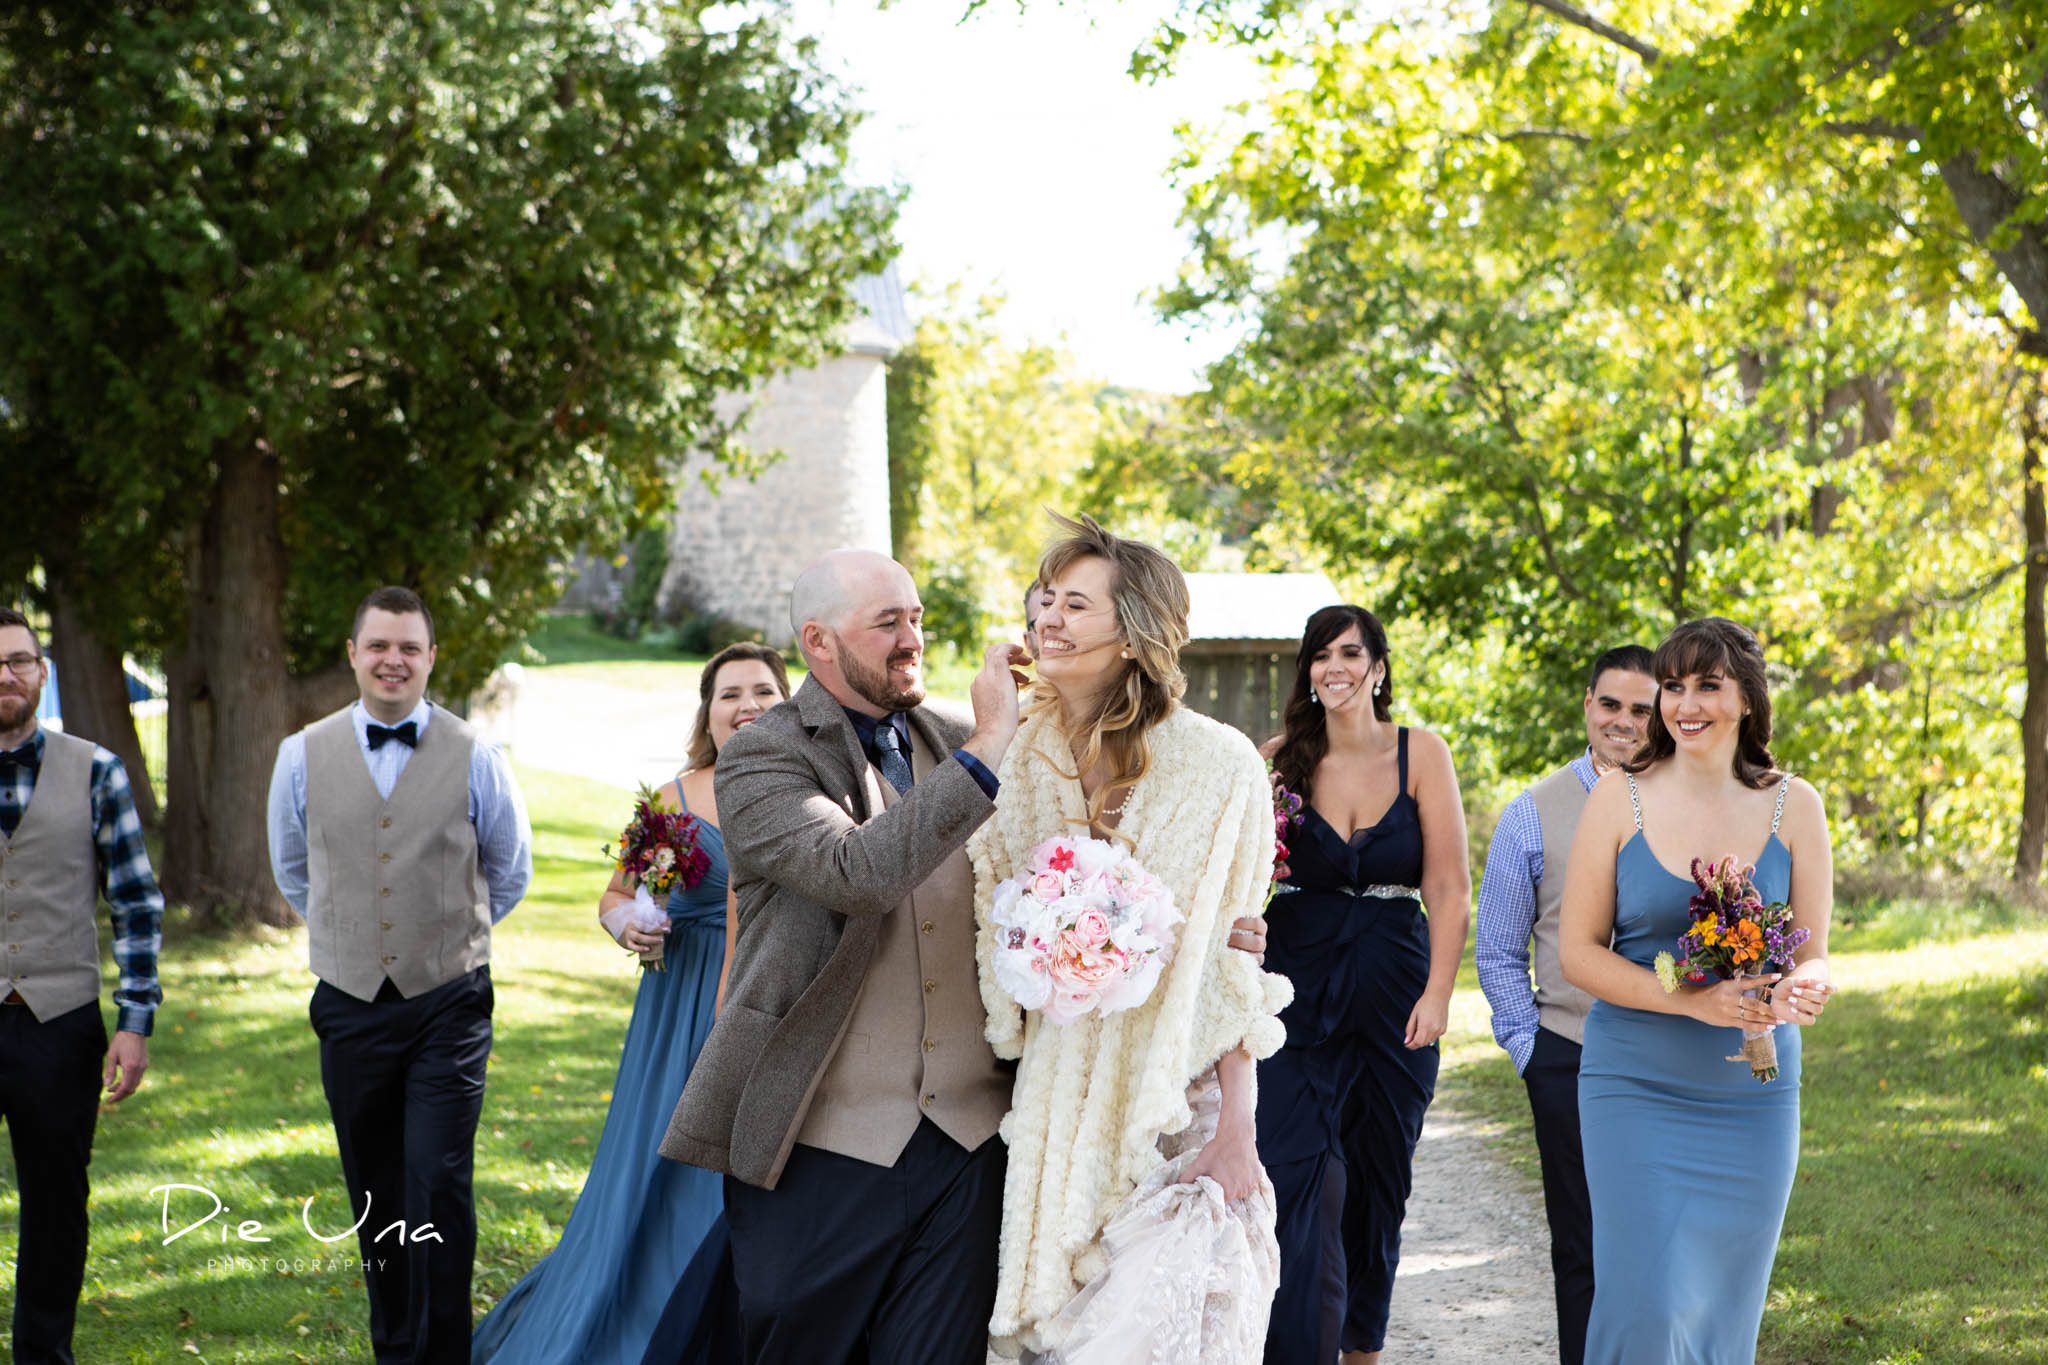 groom fixing brides hair on windy wedding day wedding party in the background walking.jpg